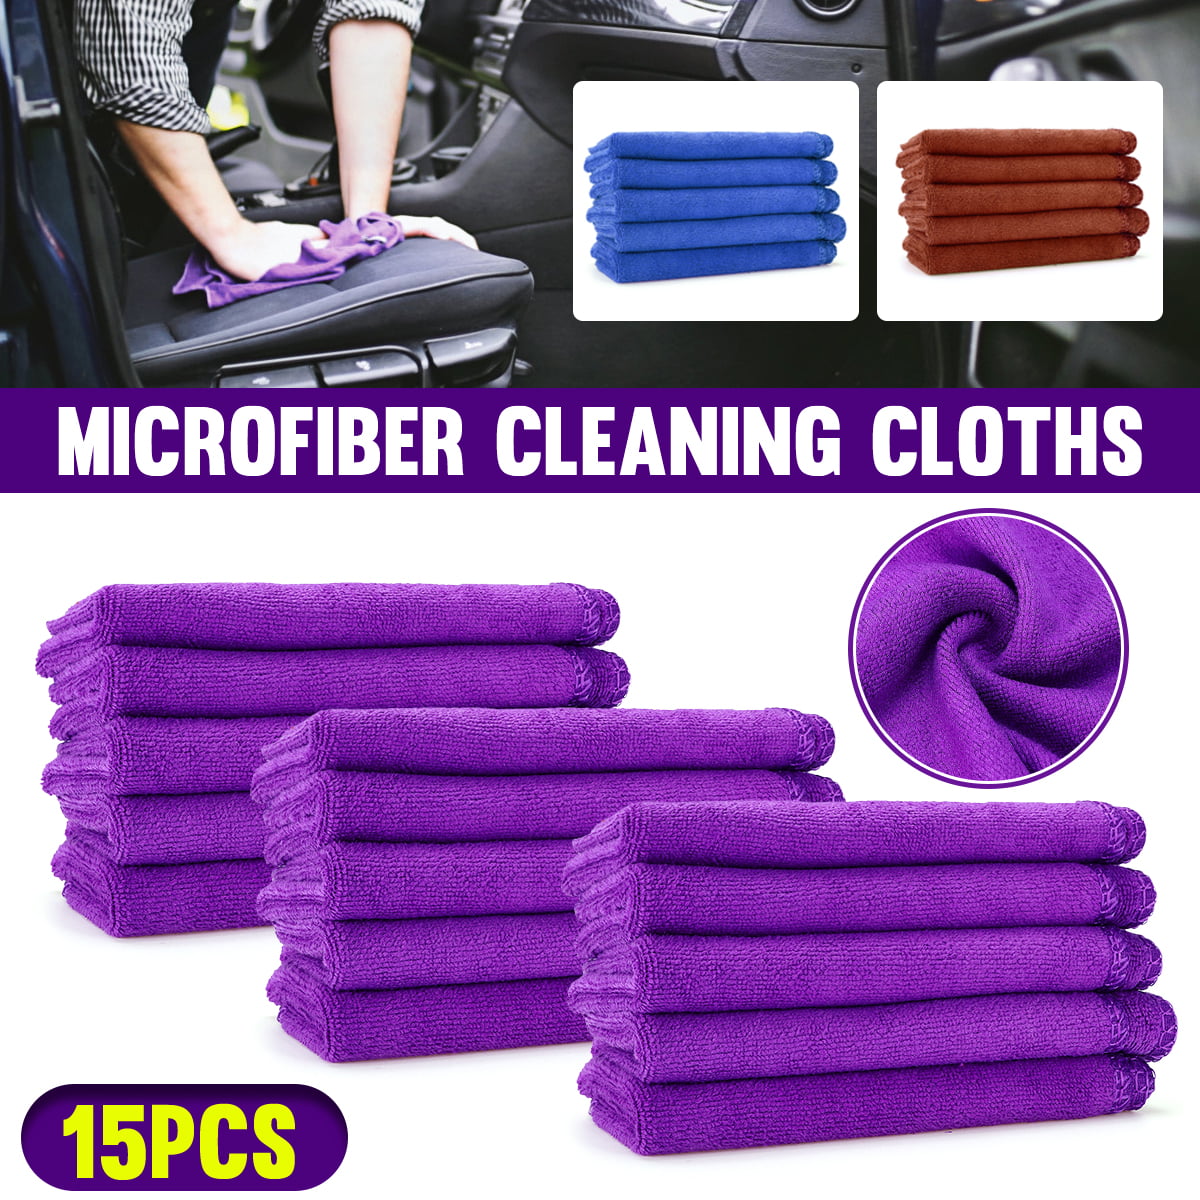 Details about   Large Microfiber Cleaning Cloth Wash Towel Drying Rag Car Polishing Detailing 